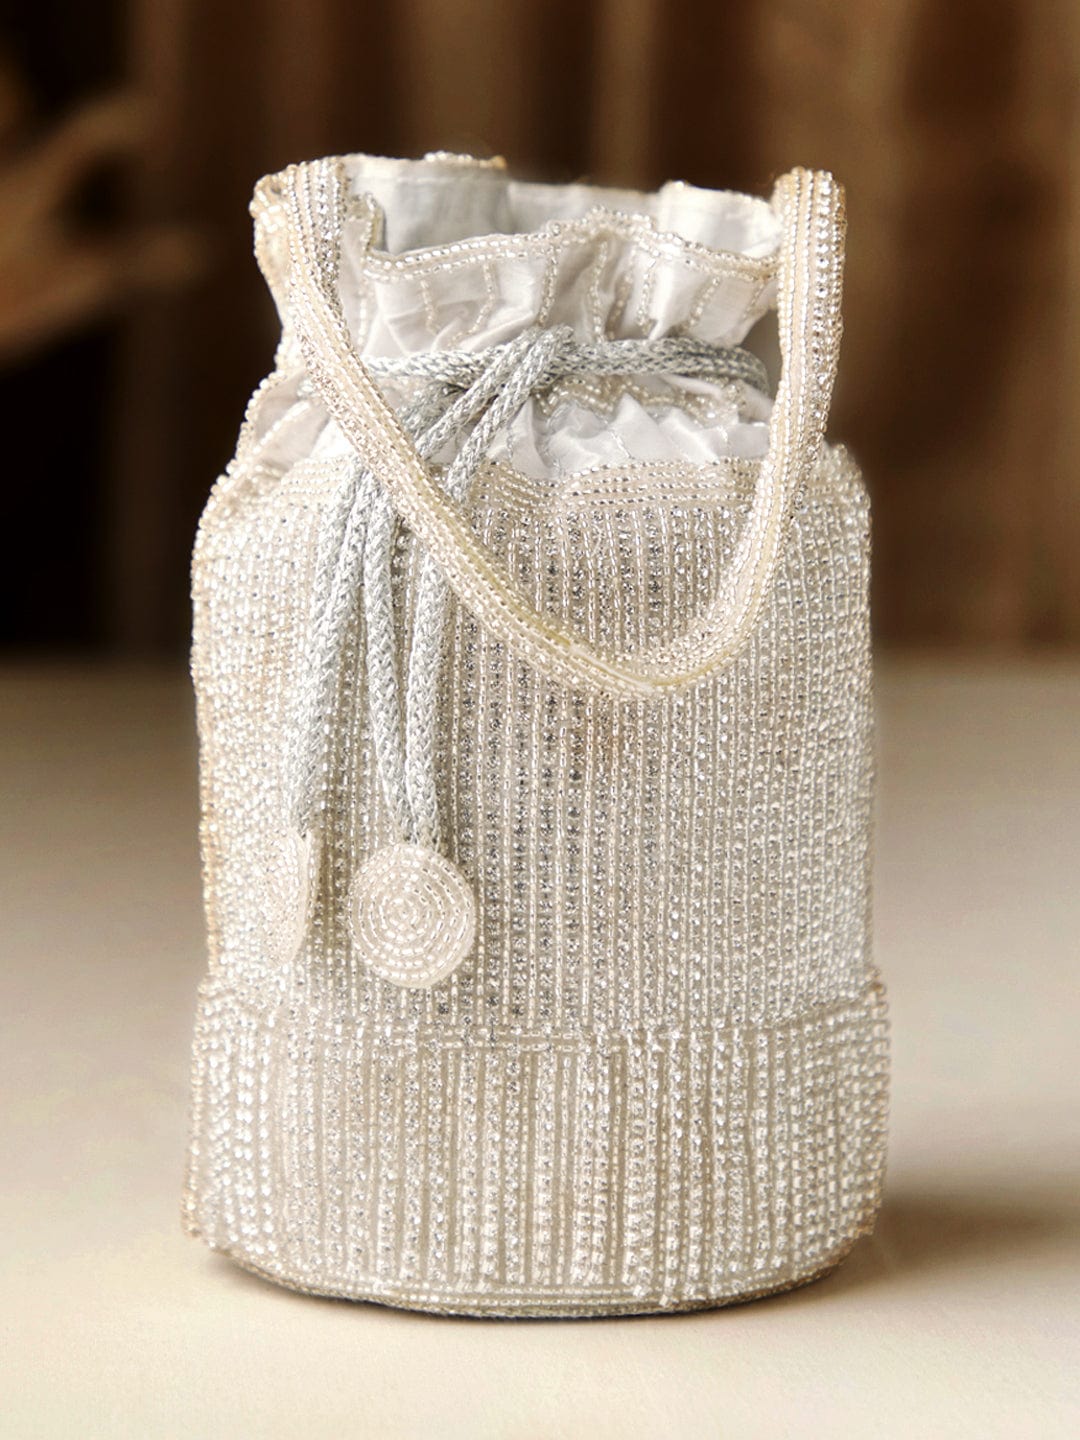 Rubans Off White Coloured Potli Bag With Embroided Design And Pearls. Handbag &amp; Wallet Accessories